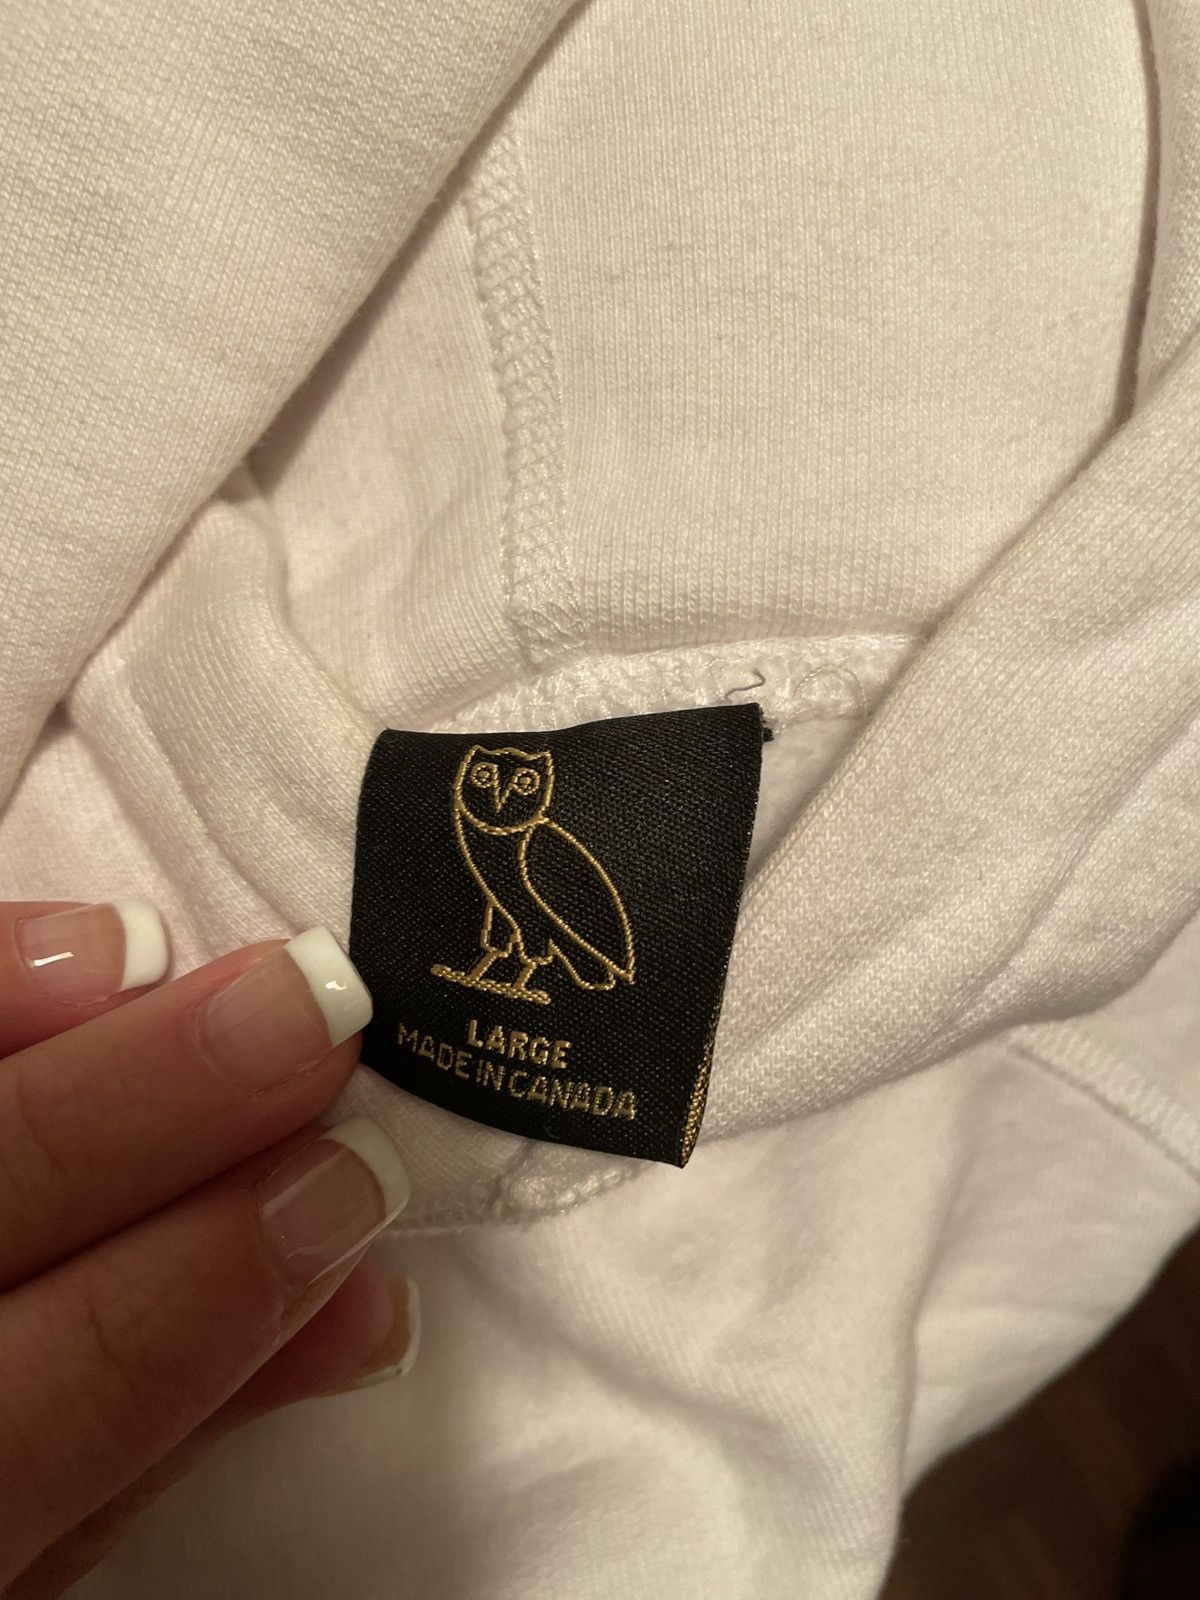 Octobers Very Own Ovo hoodie size large Size US L / EU 52-54 / 3 - 3 Thumbnail